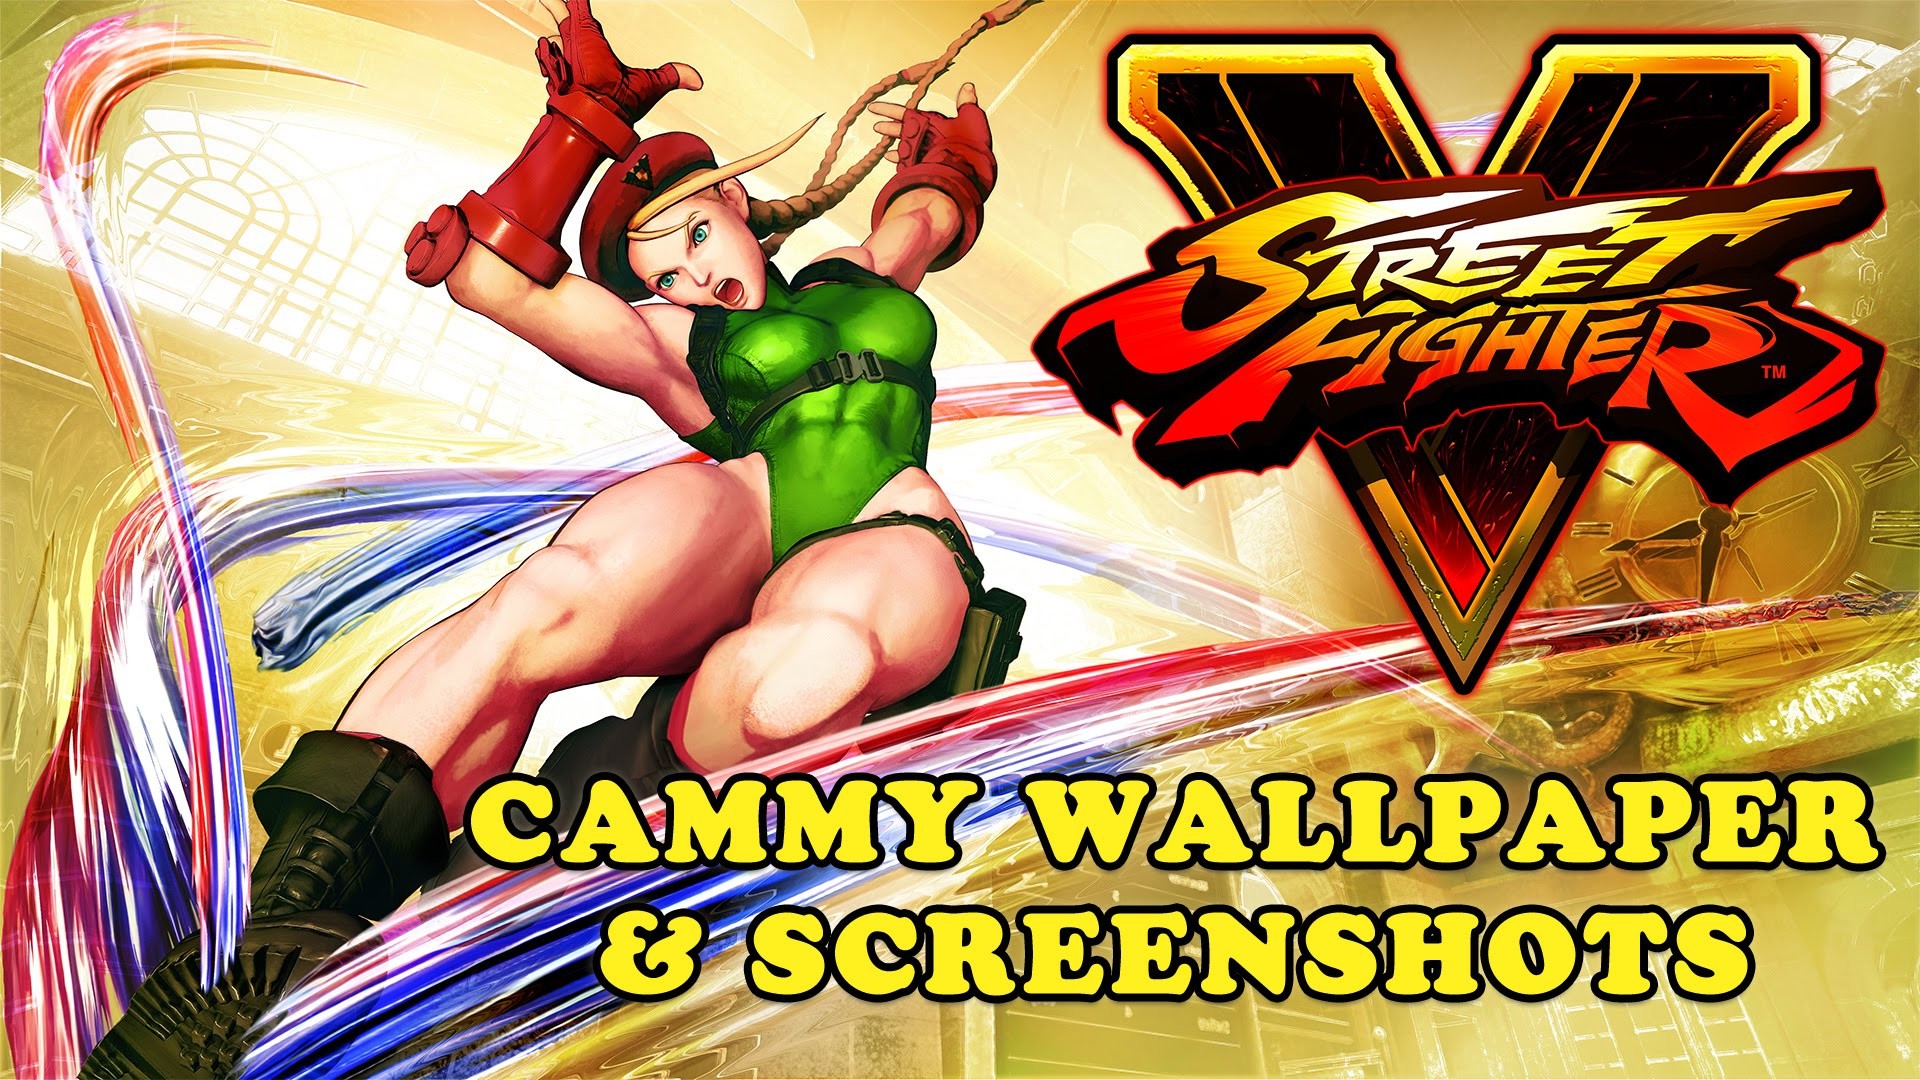 Street Fighter V – Cammy Wallpaper and Screenshots Download Link – YouTube